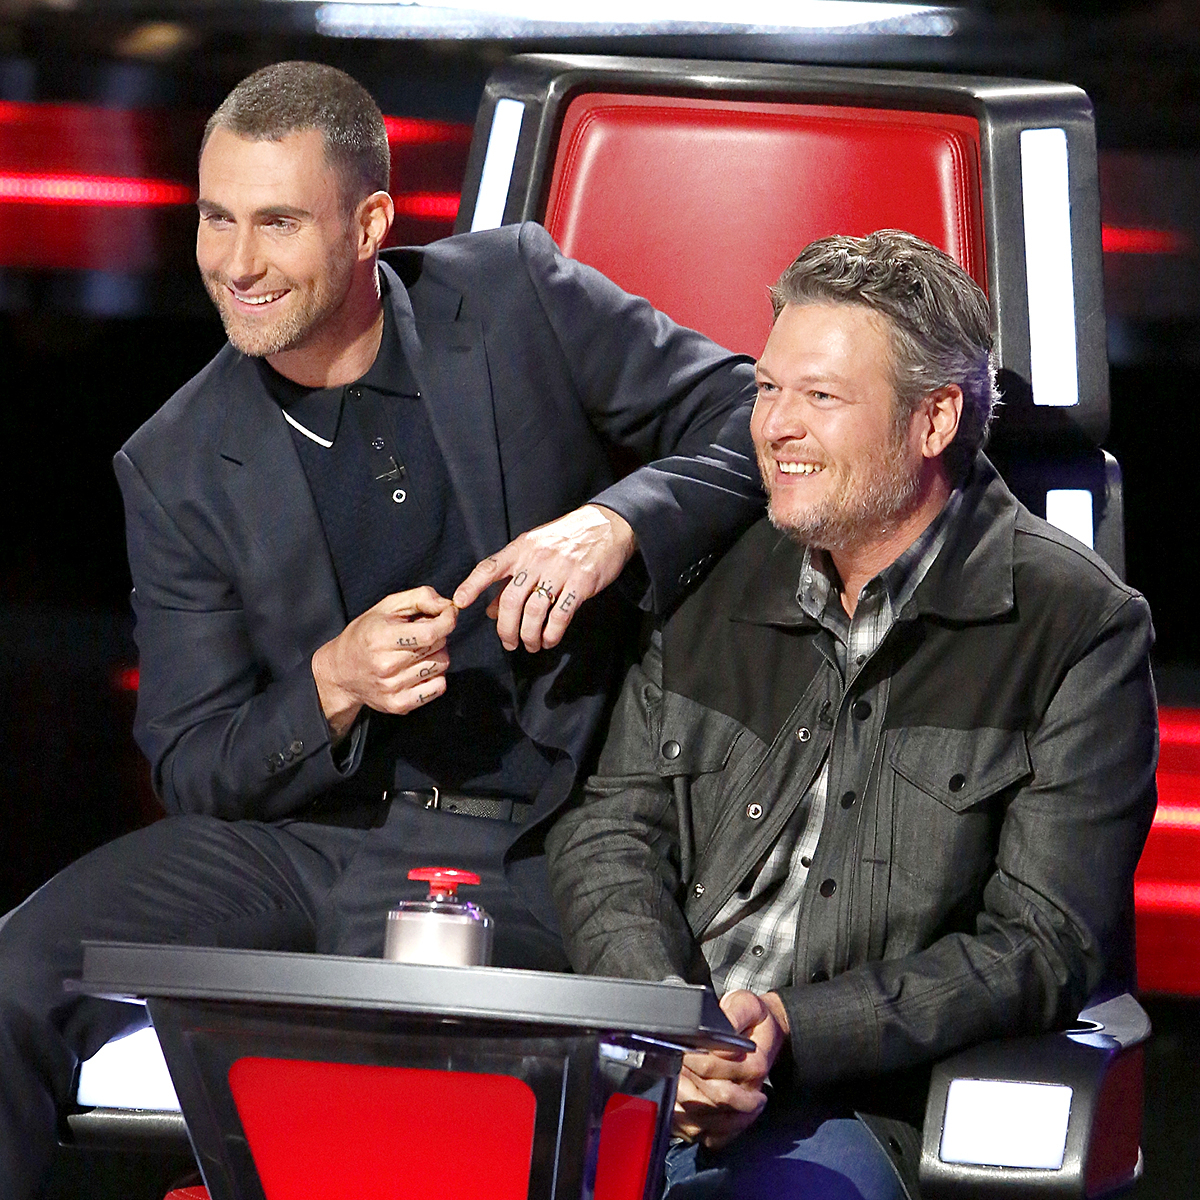 Blake Shelton Gets in Last Dig at Adam Levine Before Voice Exit